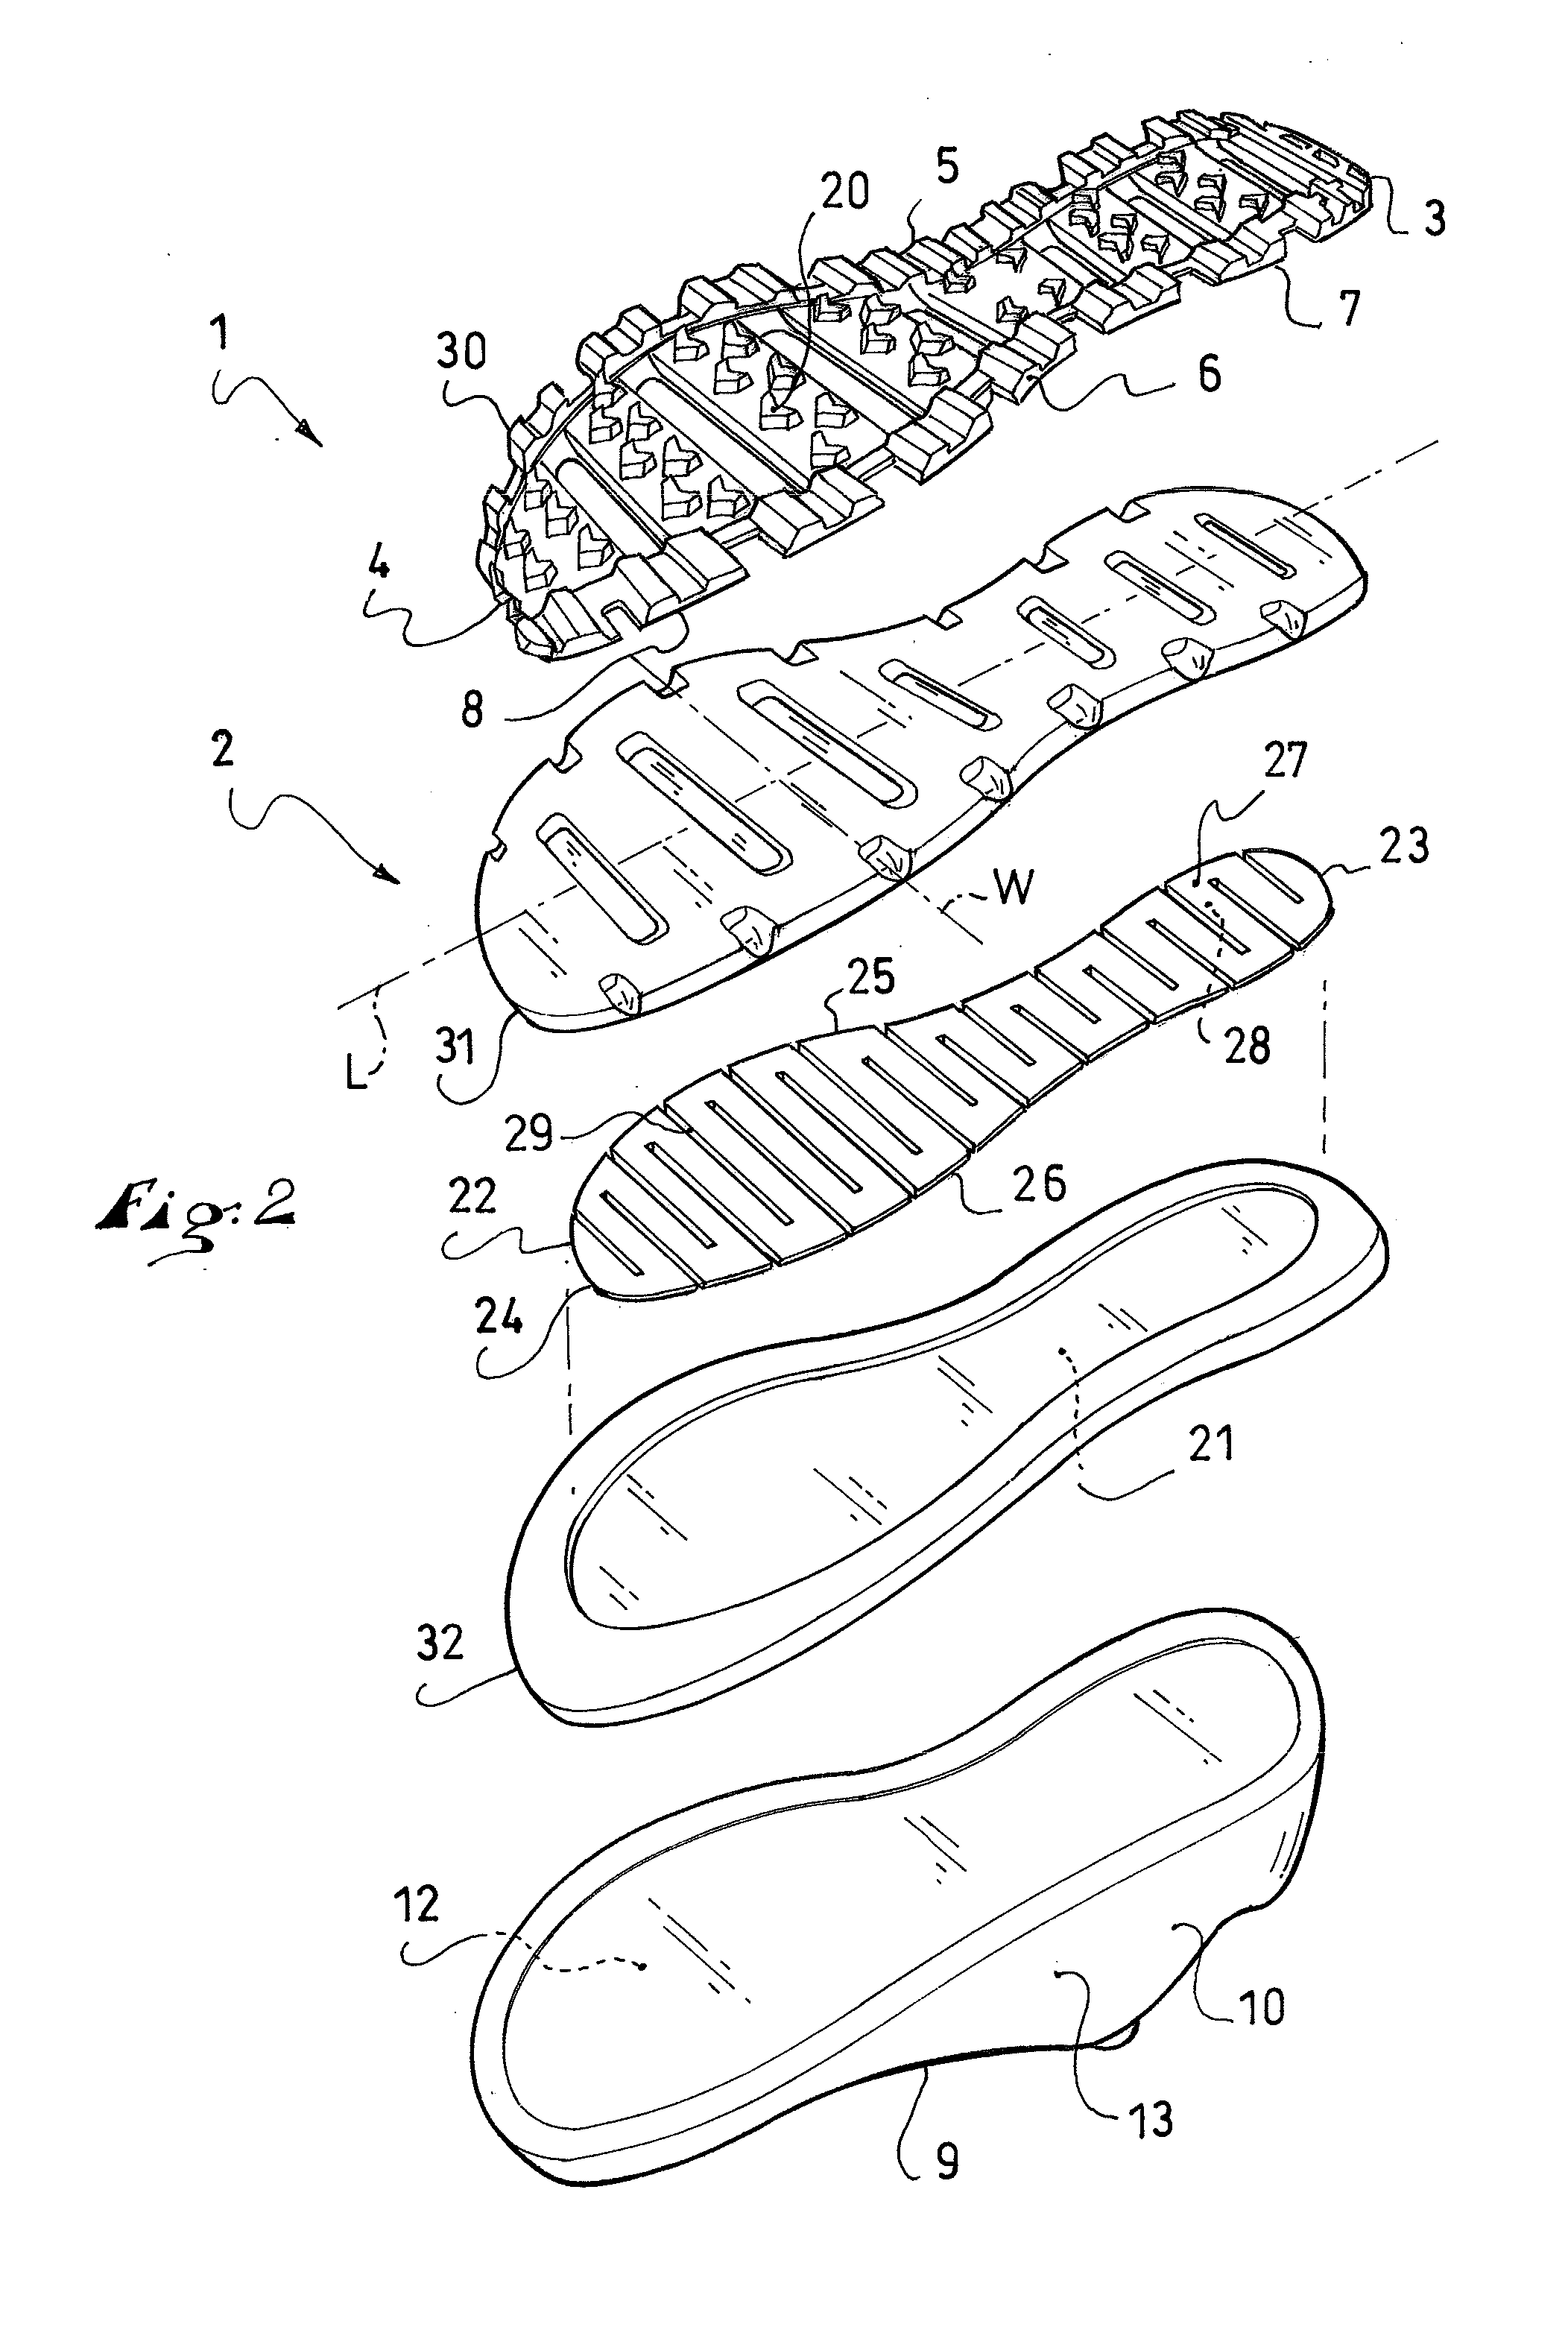 Footwear with improved sole